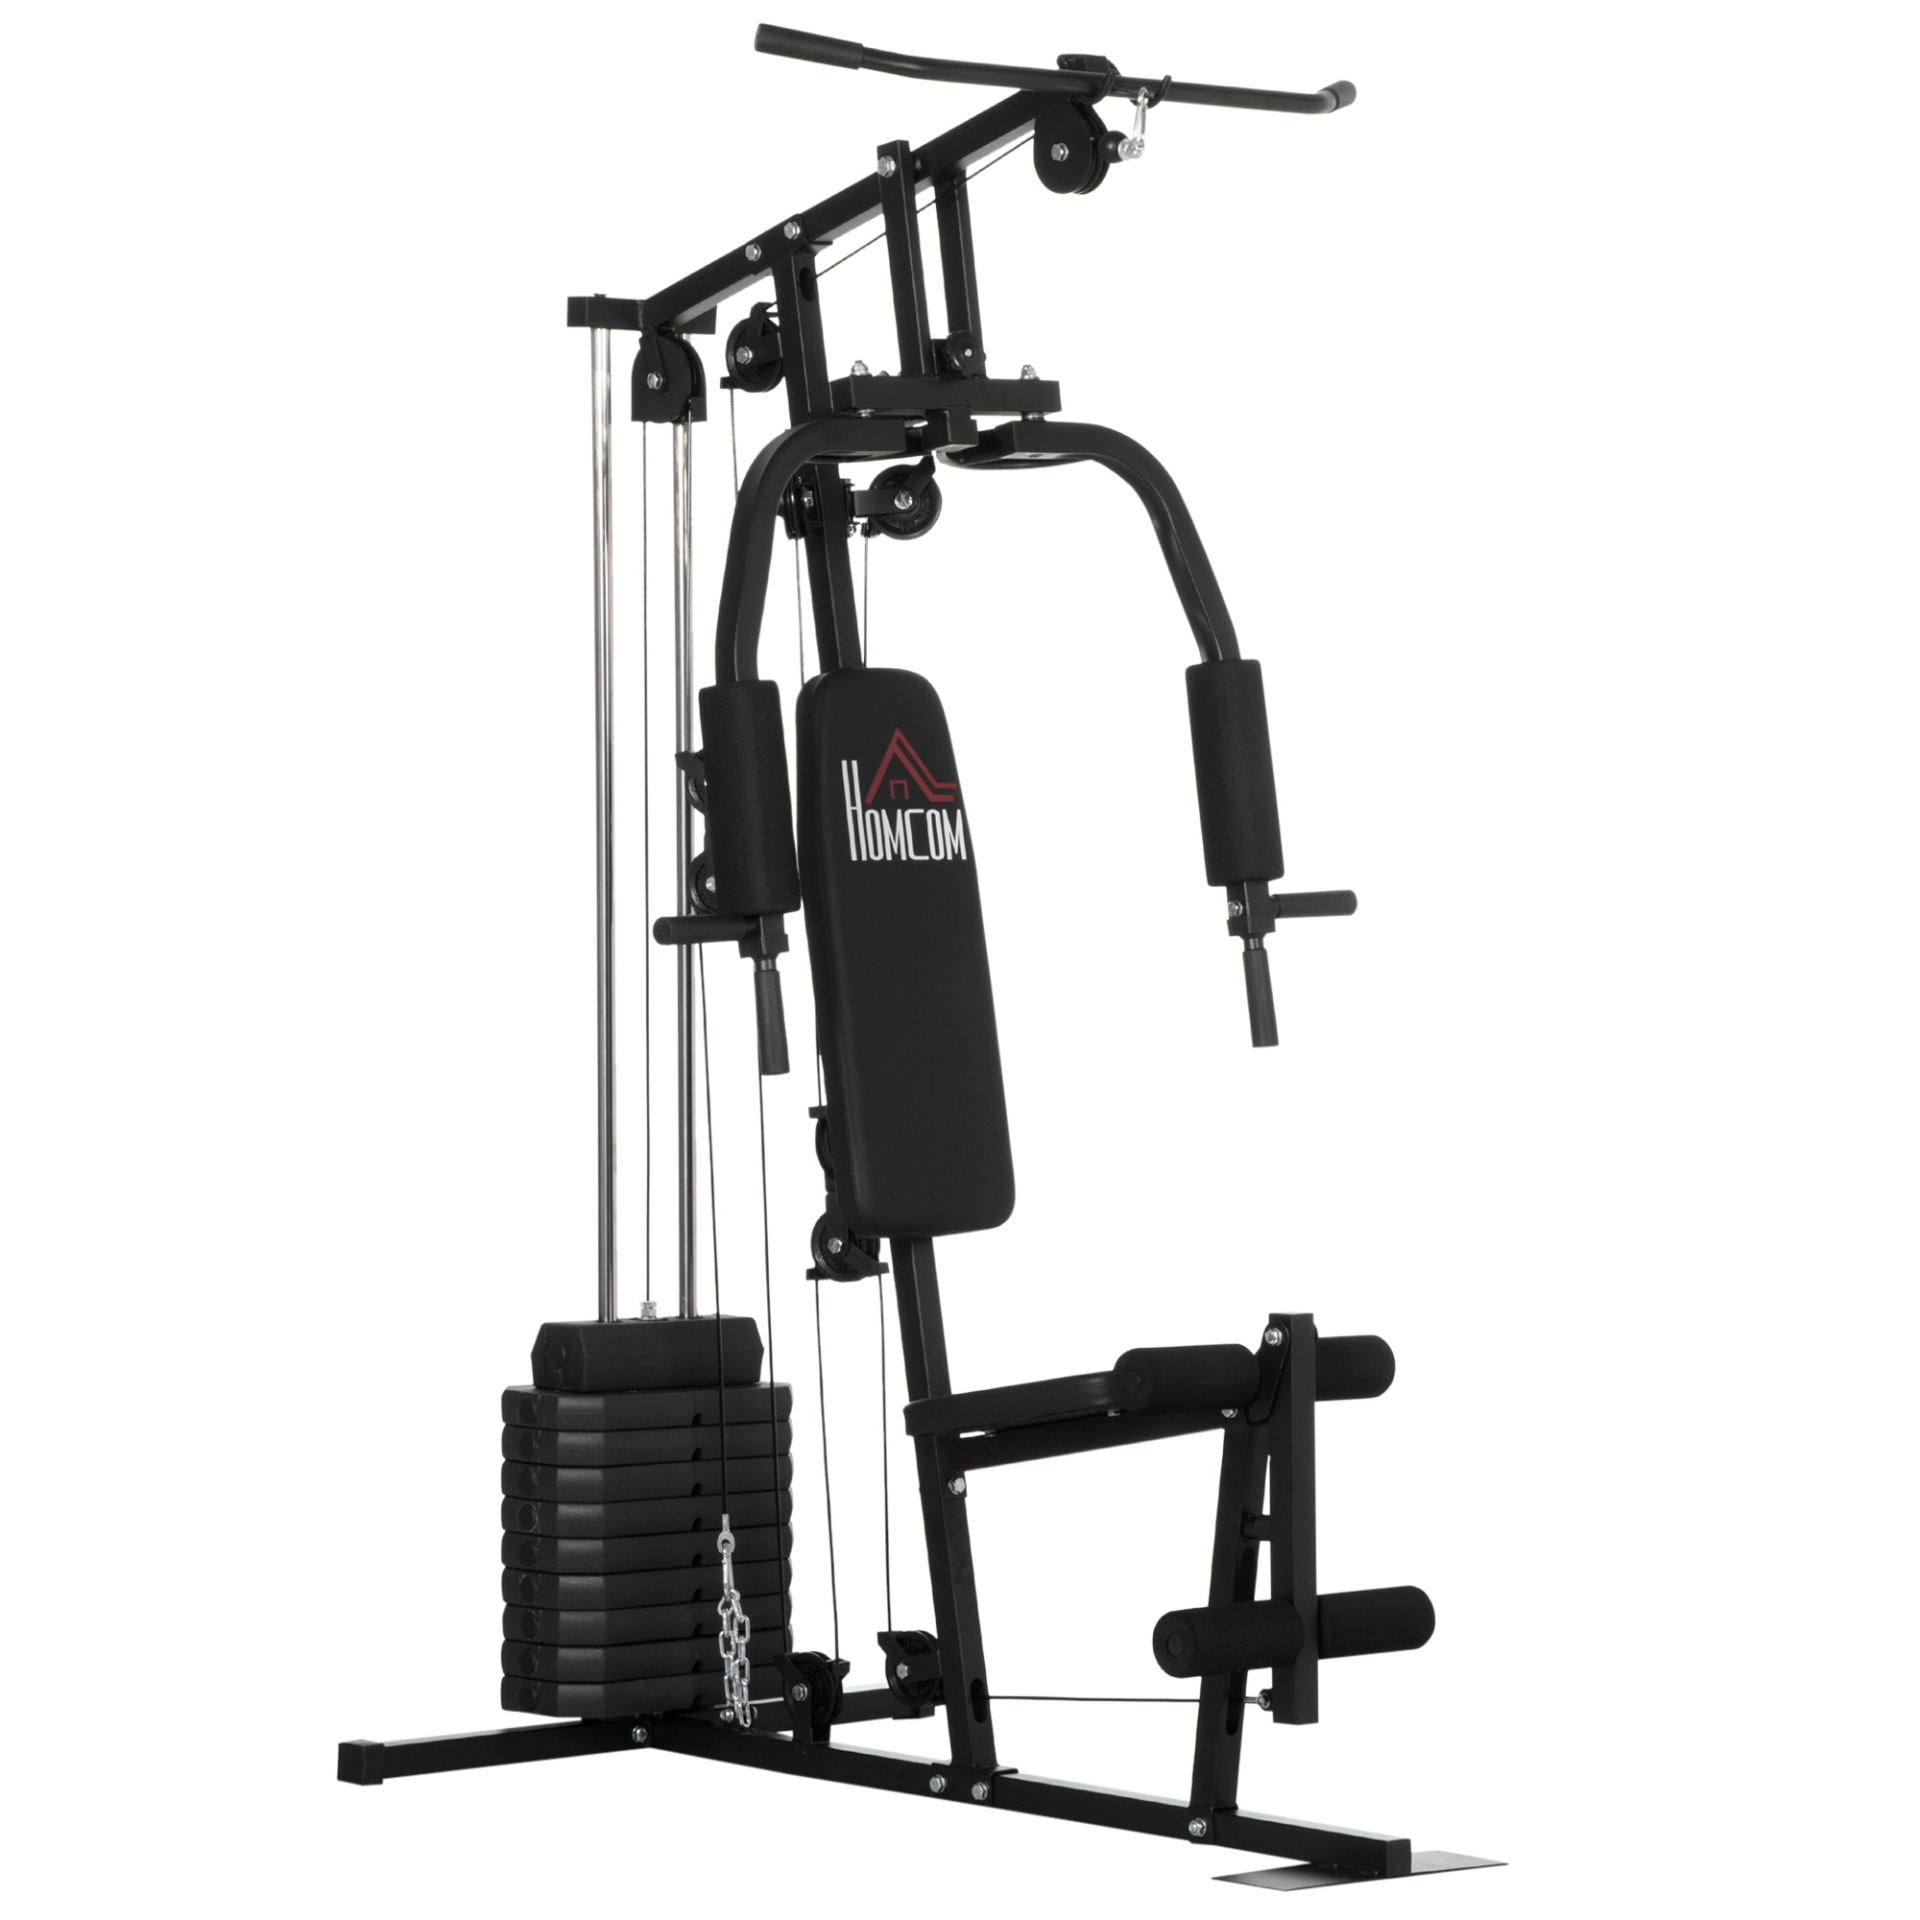 HOMCOM Multi Gym with Weights Multifunction Home Gym Machine with 45kg Weight S